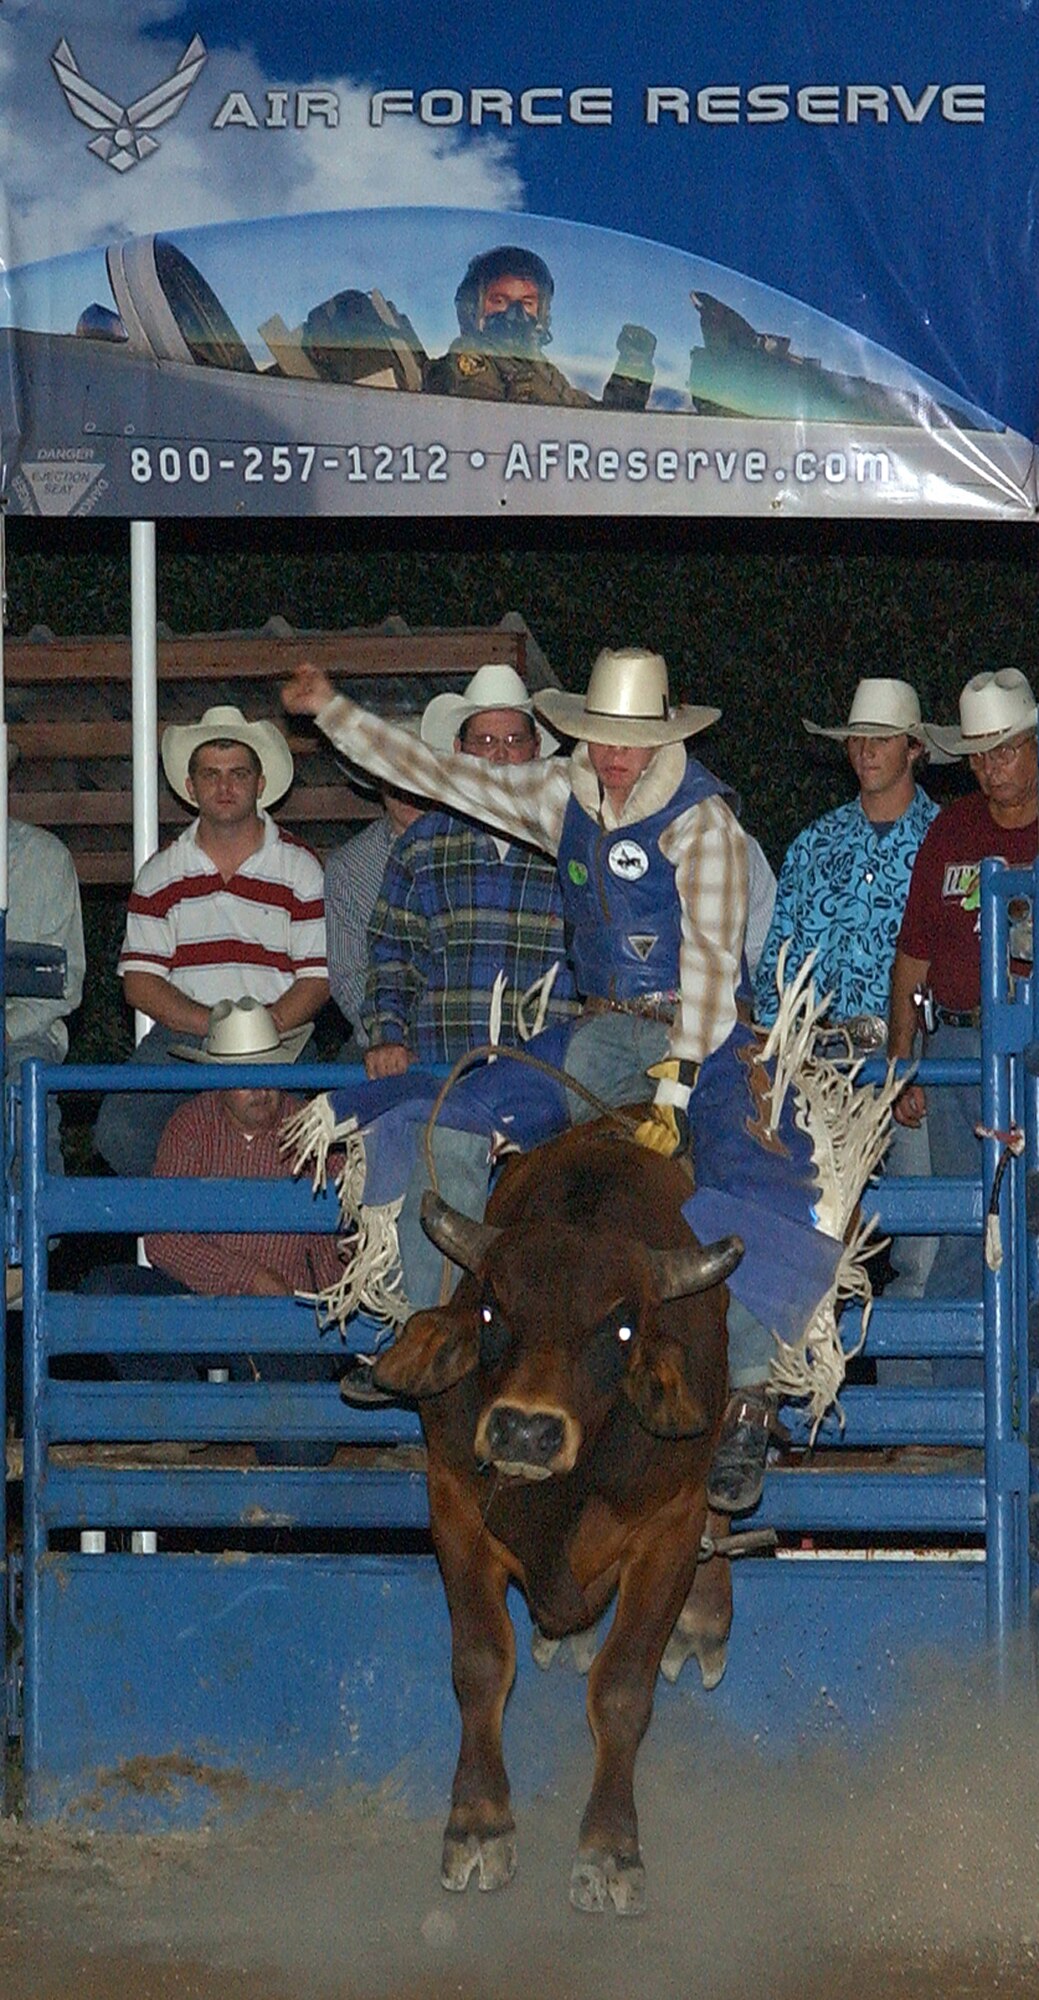 The Air Force Reserve was one of the sponsors for the 2007 Ride for the Brand Rodeo in Helotes, Texas. Chance Glocar goes for an "Eight Second Ride" in the bull riding portion of the Ride For the Brand Rodeo October, 6 in Helotes Texas. The 3-day annual event is sponsored by a committee made up of reservists from the 433rd Airlift Wing, Lackland Air Force Base, Texas, neighboring military units and veterans. Procedes from the rodeo will help local schools, provide scholarships to area high school seniors and to military members and their families. (U.S. Air Force Photo/Alan Boedeker)